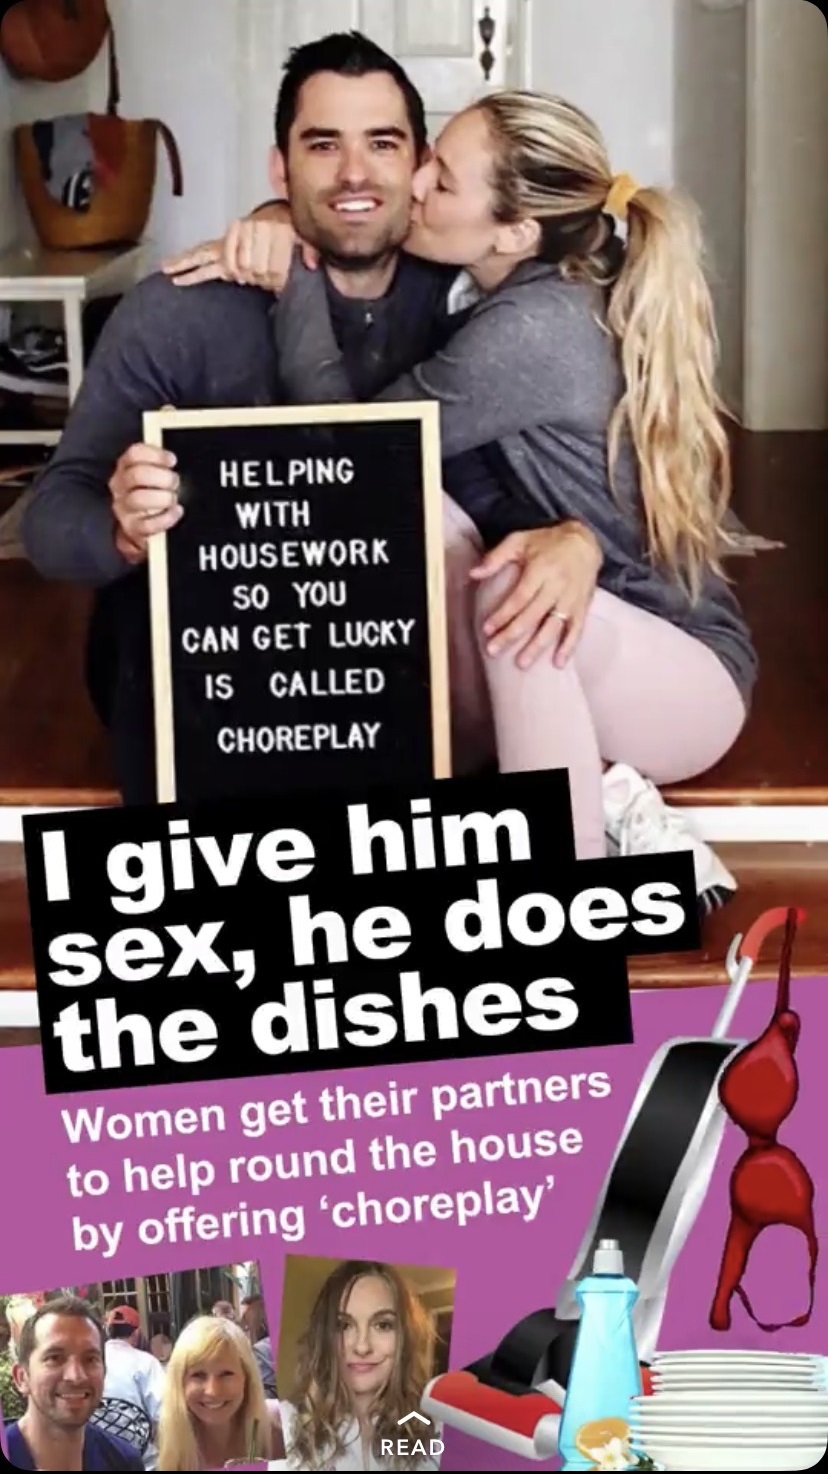 helping with housework so you can get lucky is called choreplay - Helping With Housework So You Can Get Lucky Is Called Choreplay I give him sex, he does the dishes Women get their partners to help round the house by offering 'choreplay Read